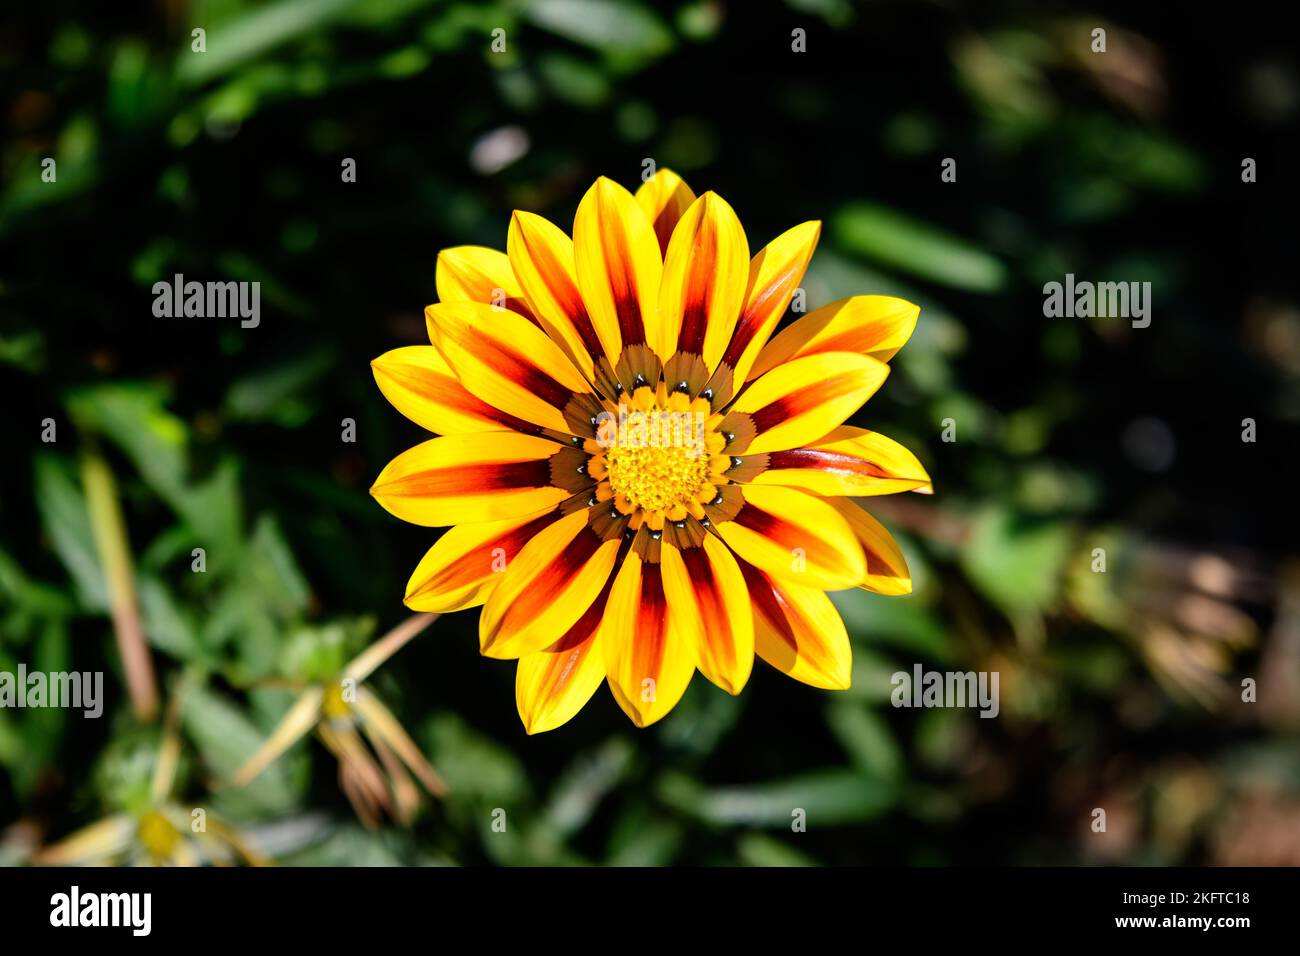 Top view of one vivid yellow and orange gazania flower and blurred green leaves in soft focus, in a garden in a sunny summer day, beautiful outdoor fl Stock Photo